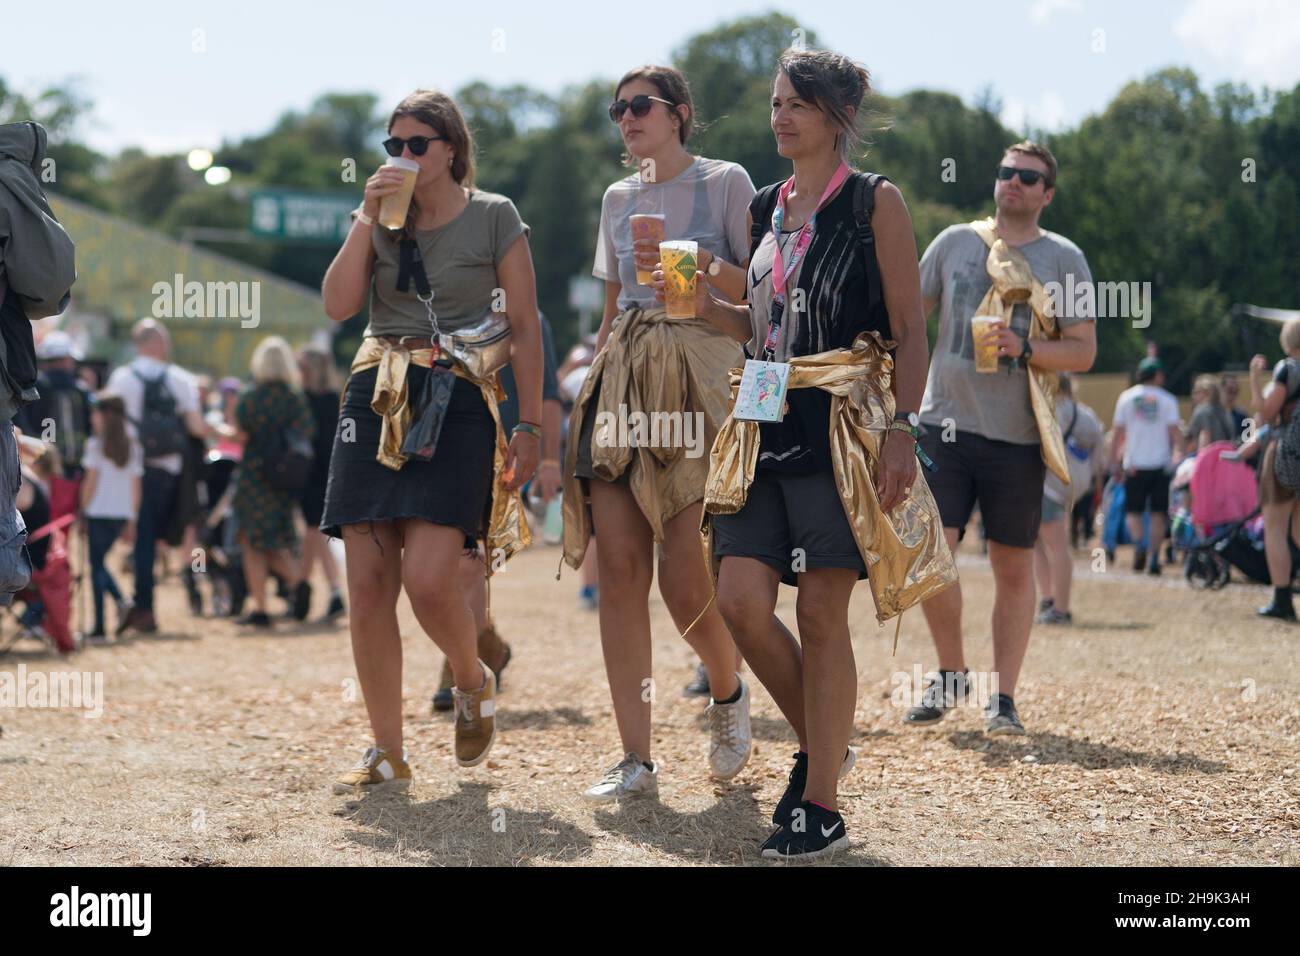 Festival goers on Day 2 of the 2019 Latitude Festival in Suffolk, UK. Photo date: Saturday, July 20, 2019. Photo credit should read: Richard Gray/EMPICS Entertainment Stock Photo